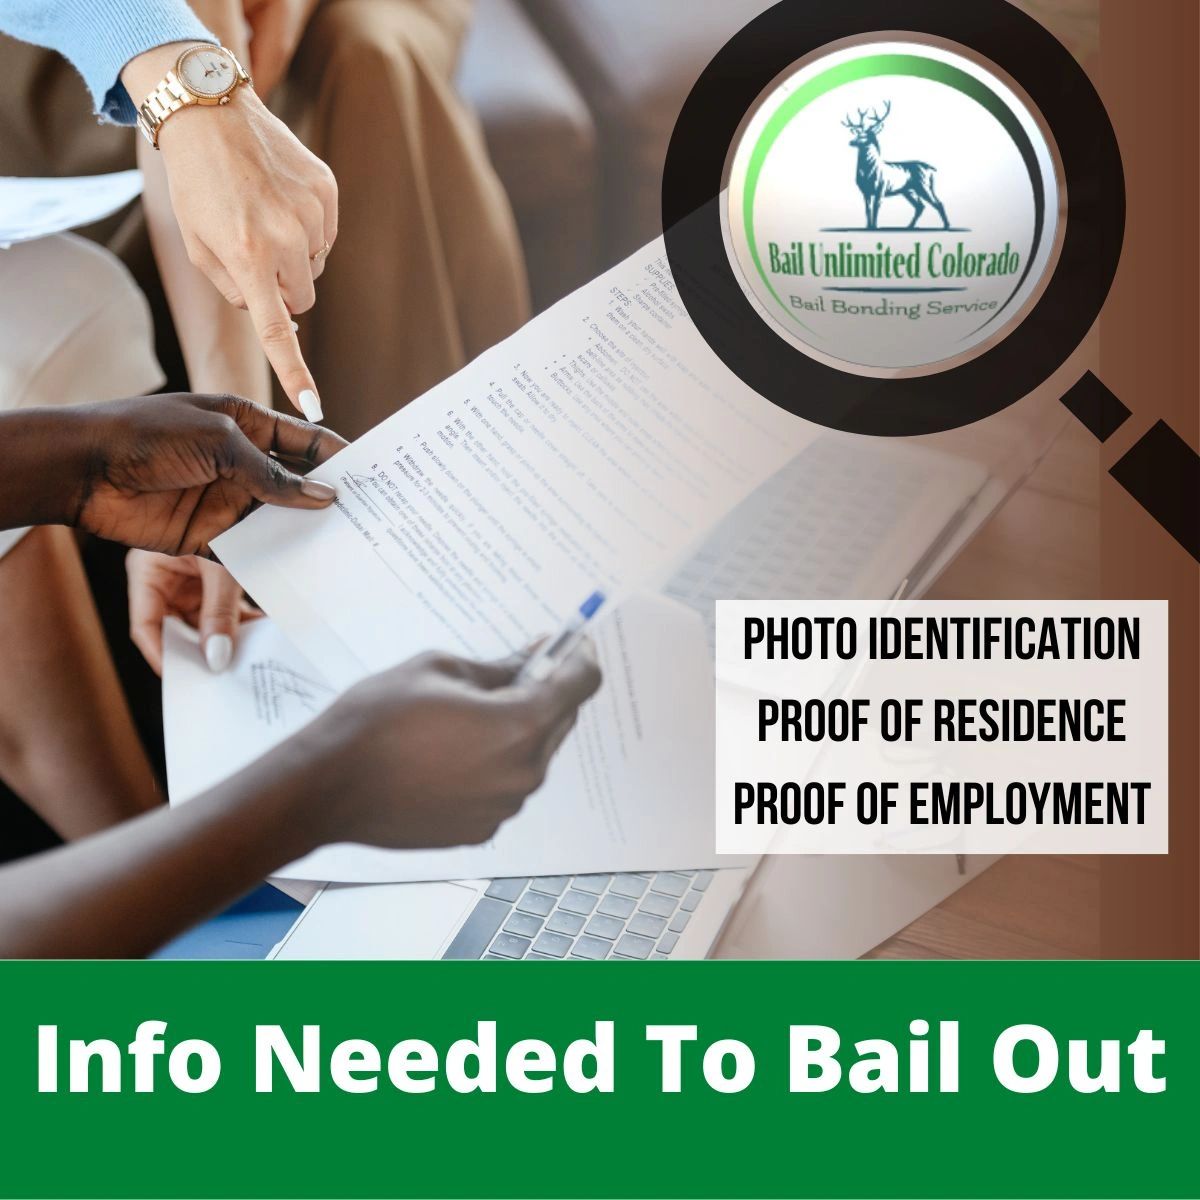 Info Needed To Bail Out - Photo ID Proof of Employment & Residence LOGO Bail Unlimited Colorado